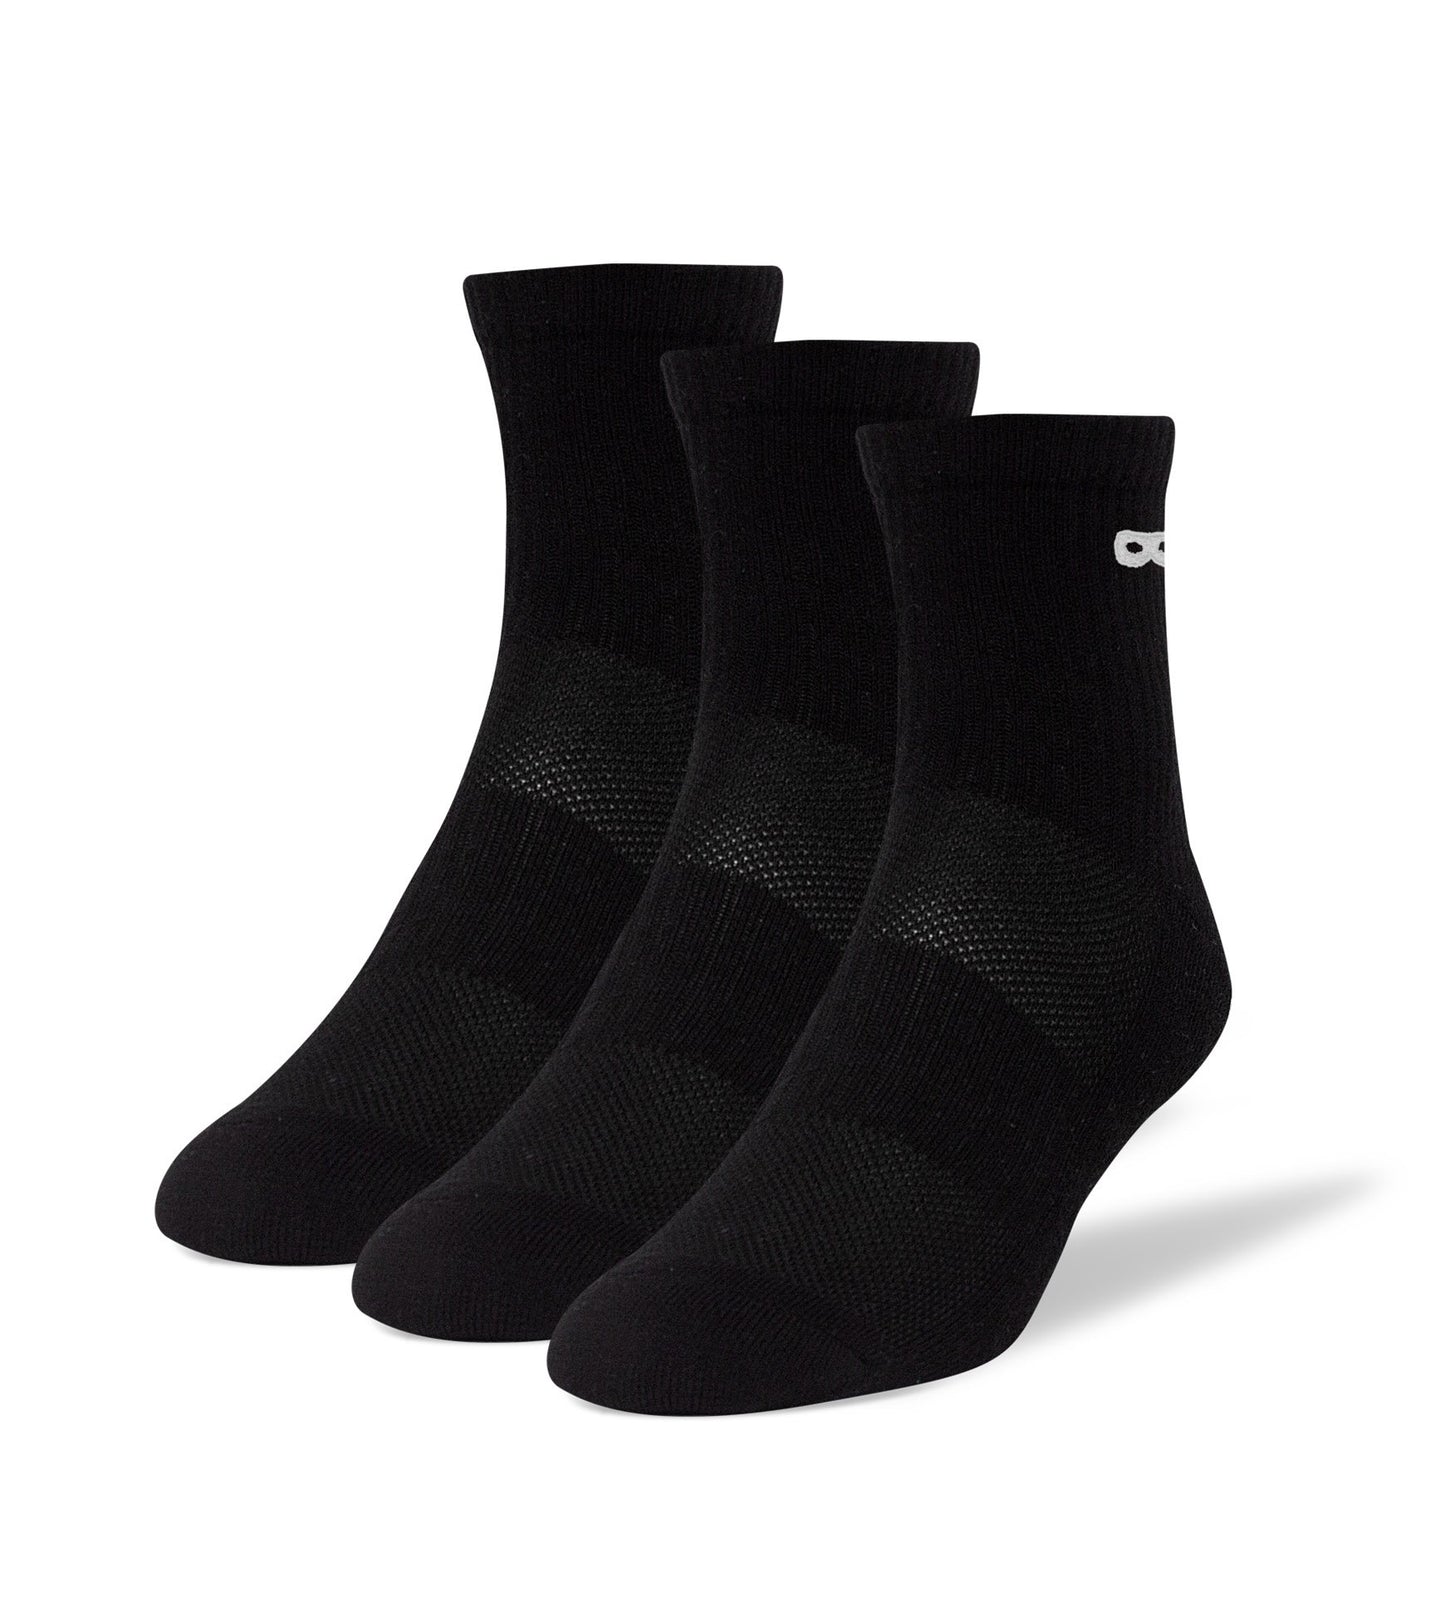 Blackout Men's Cushion Ankle Socks 3 Pack – Pair of Thieves